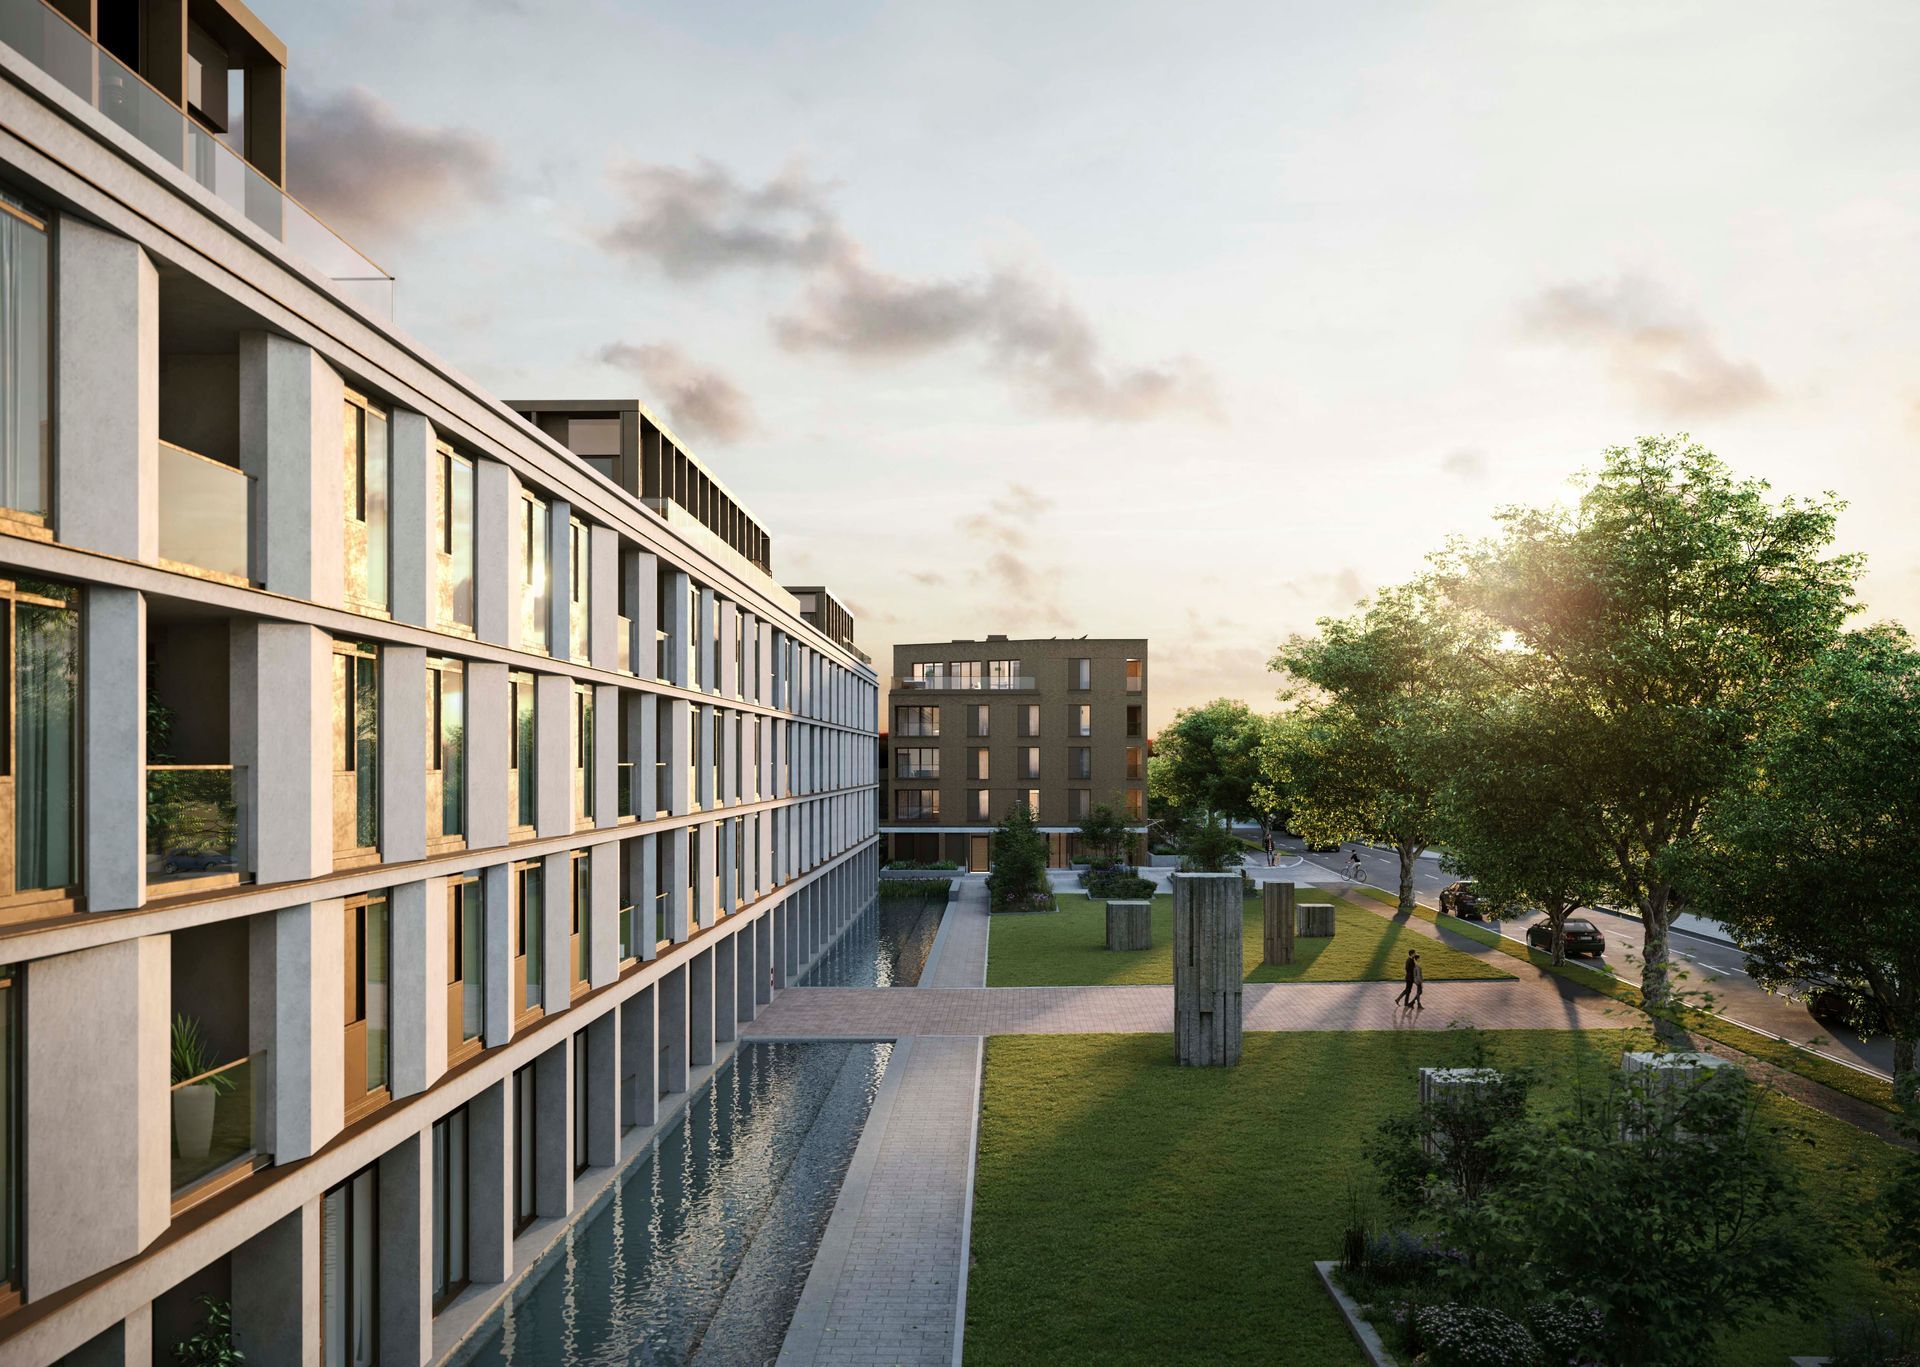 An artist 's impression of a large apartment building at Walton Court.